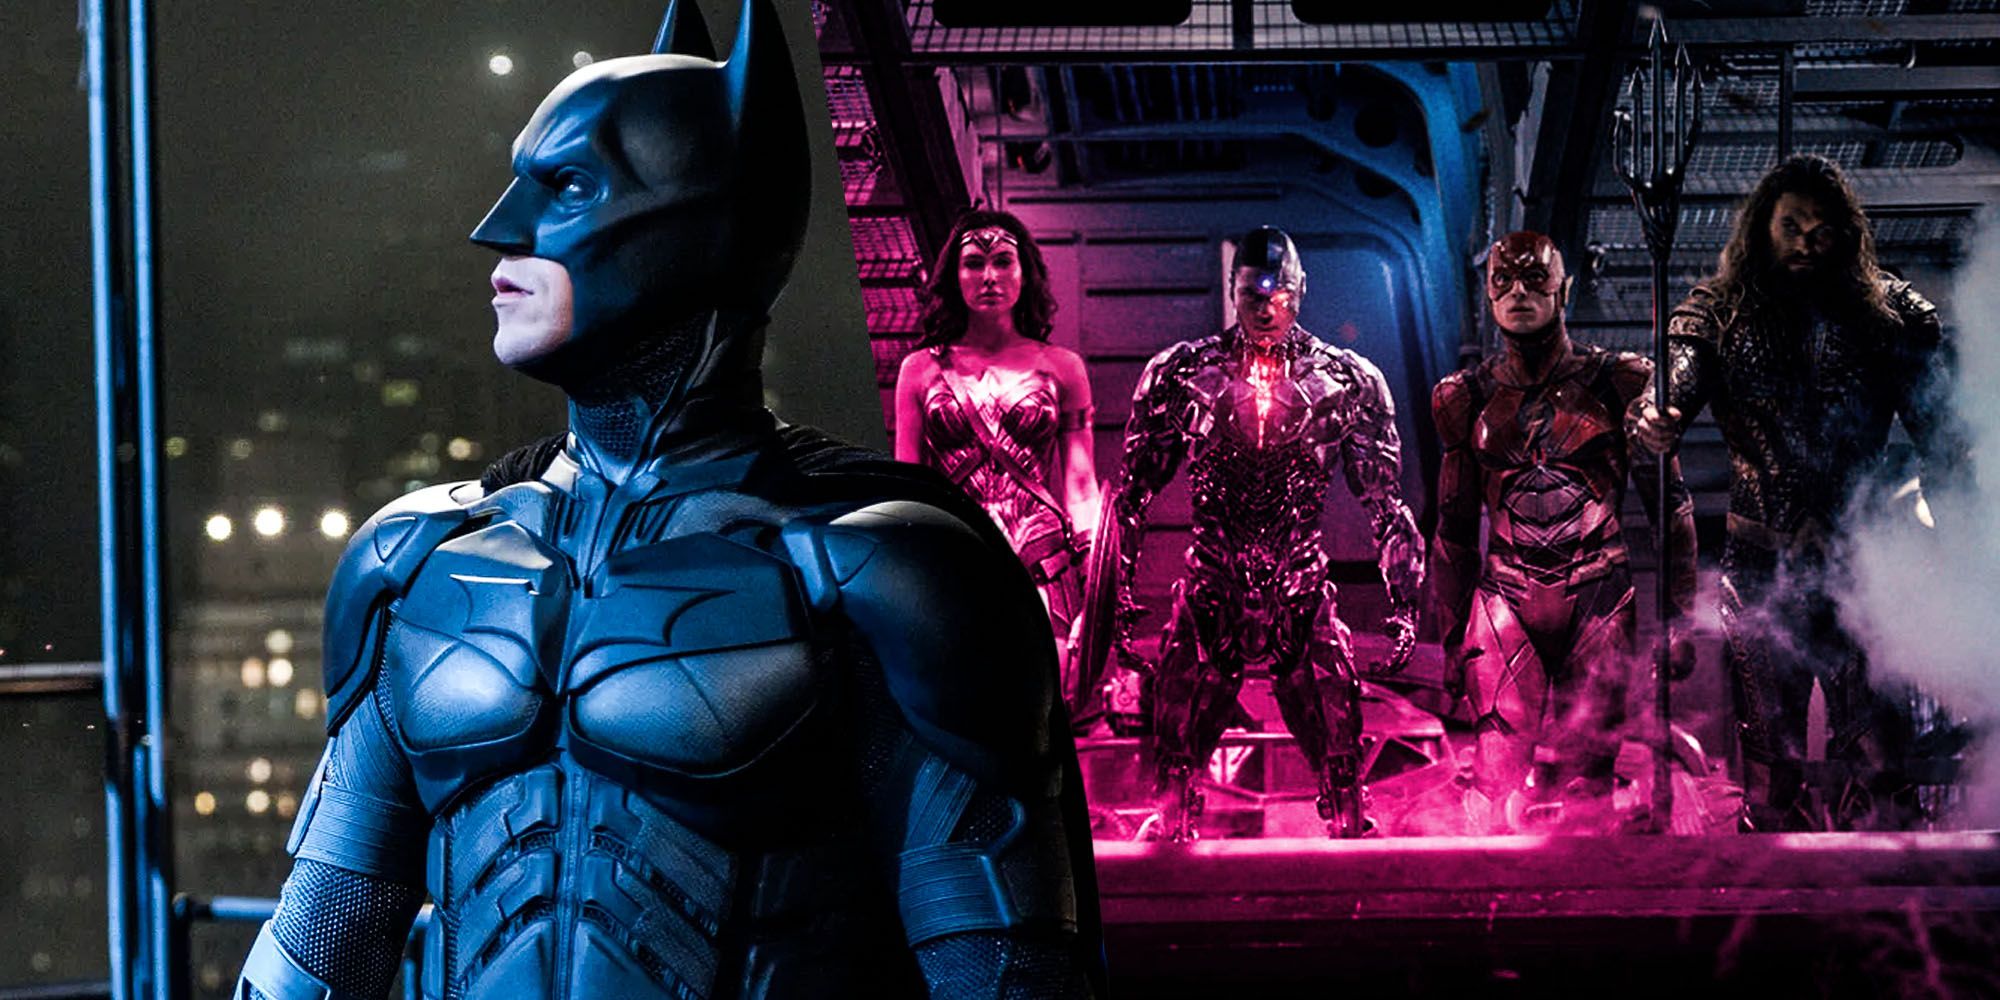 DCEU connection to the dark knight trilogy Christian bale batman snyder cut justice league